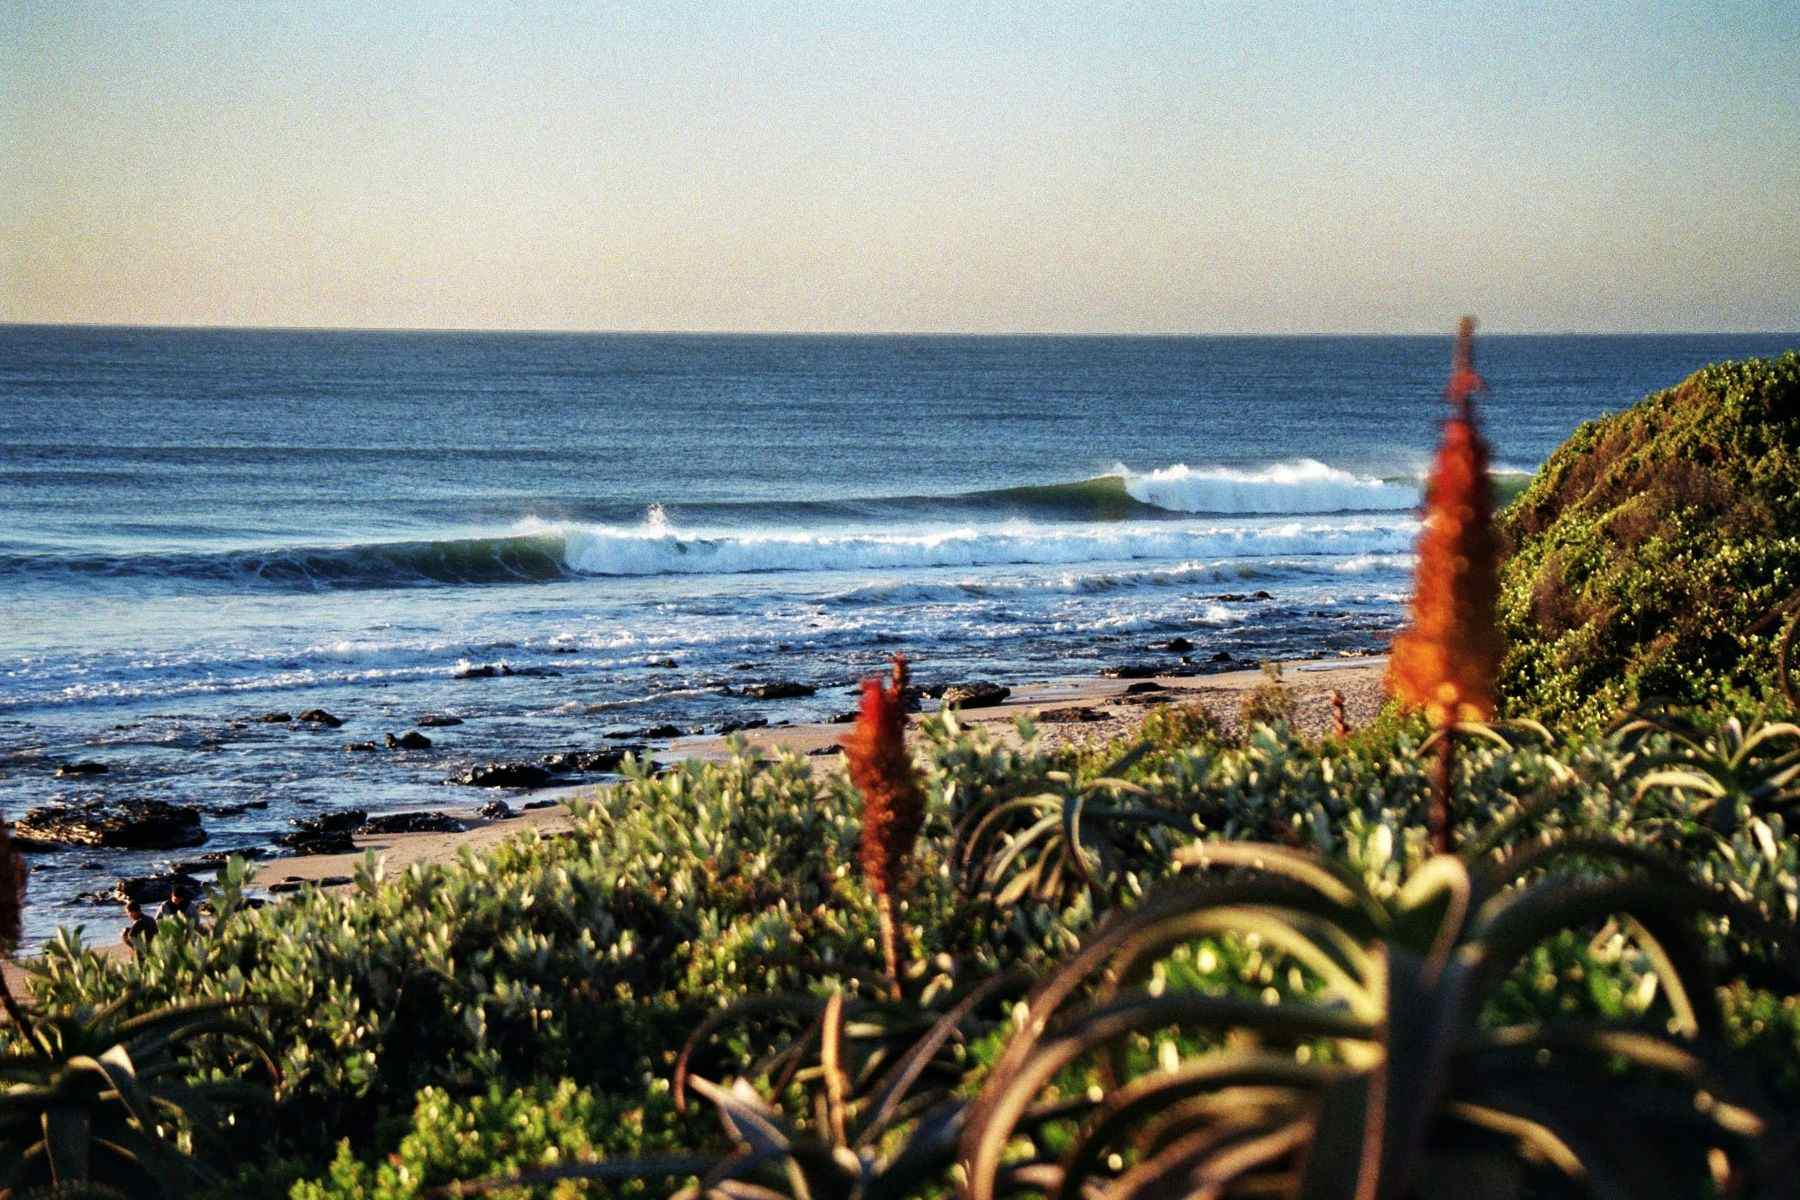 empty waves at jeffreys bay, south africa